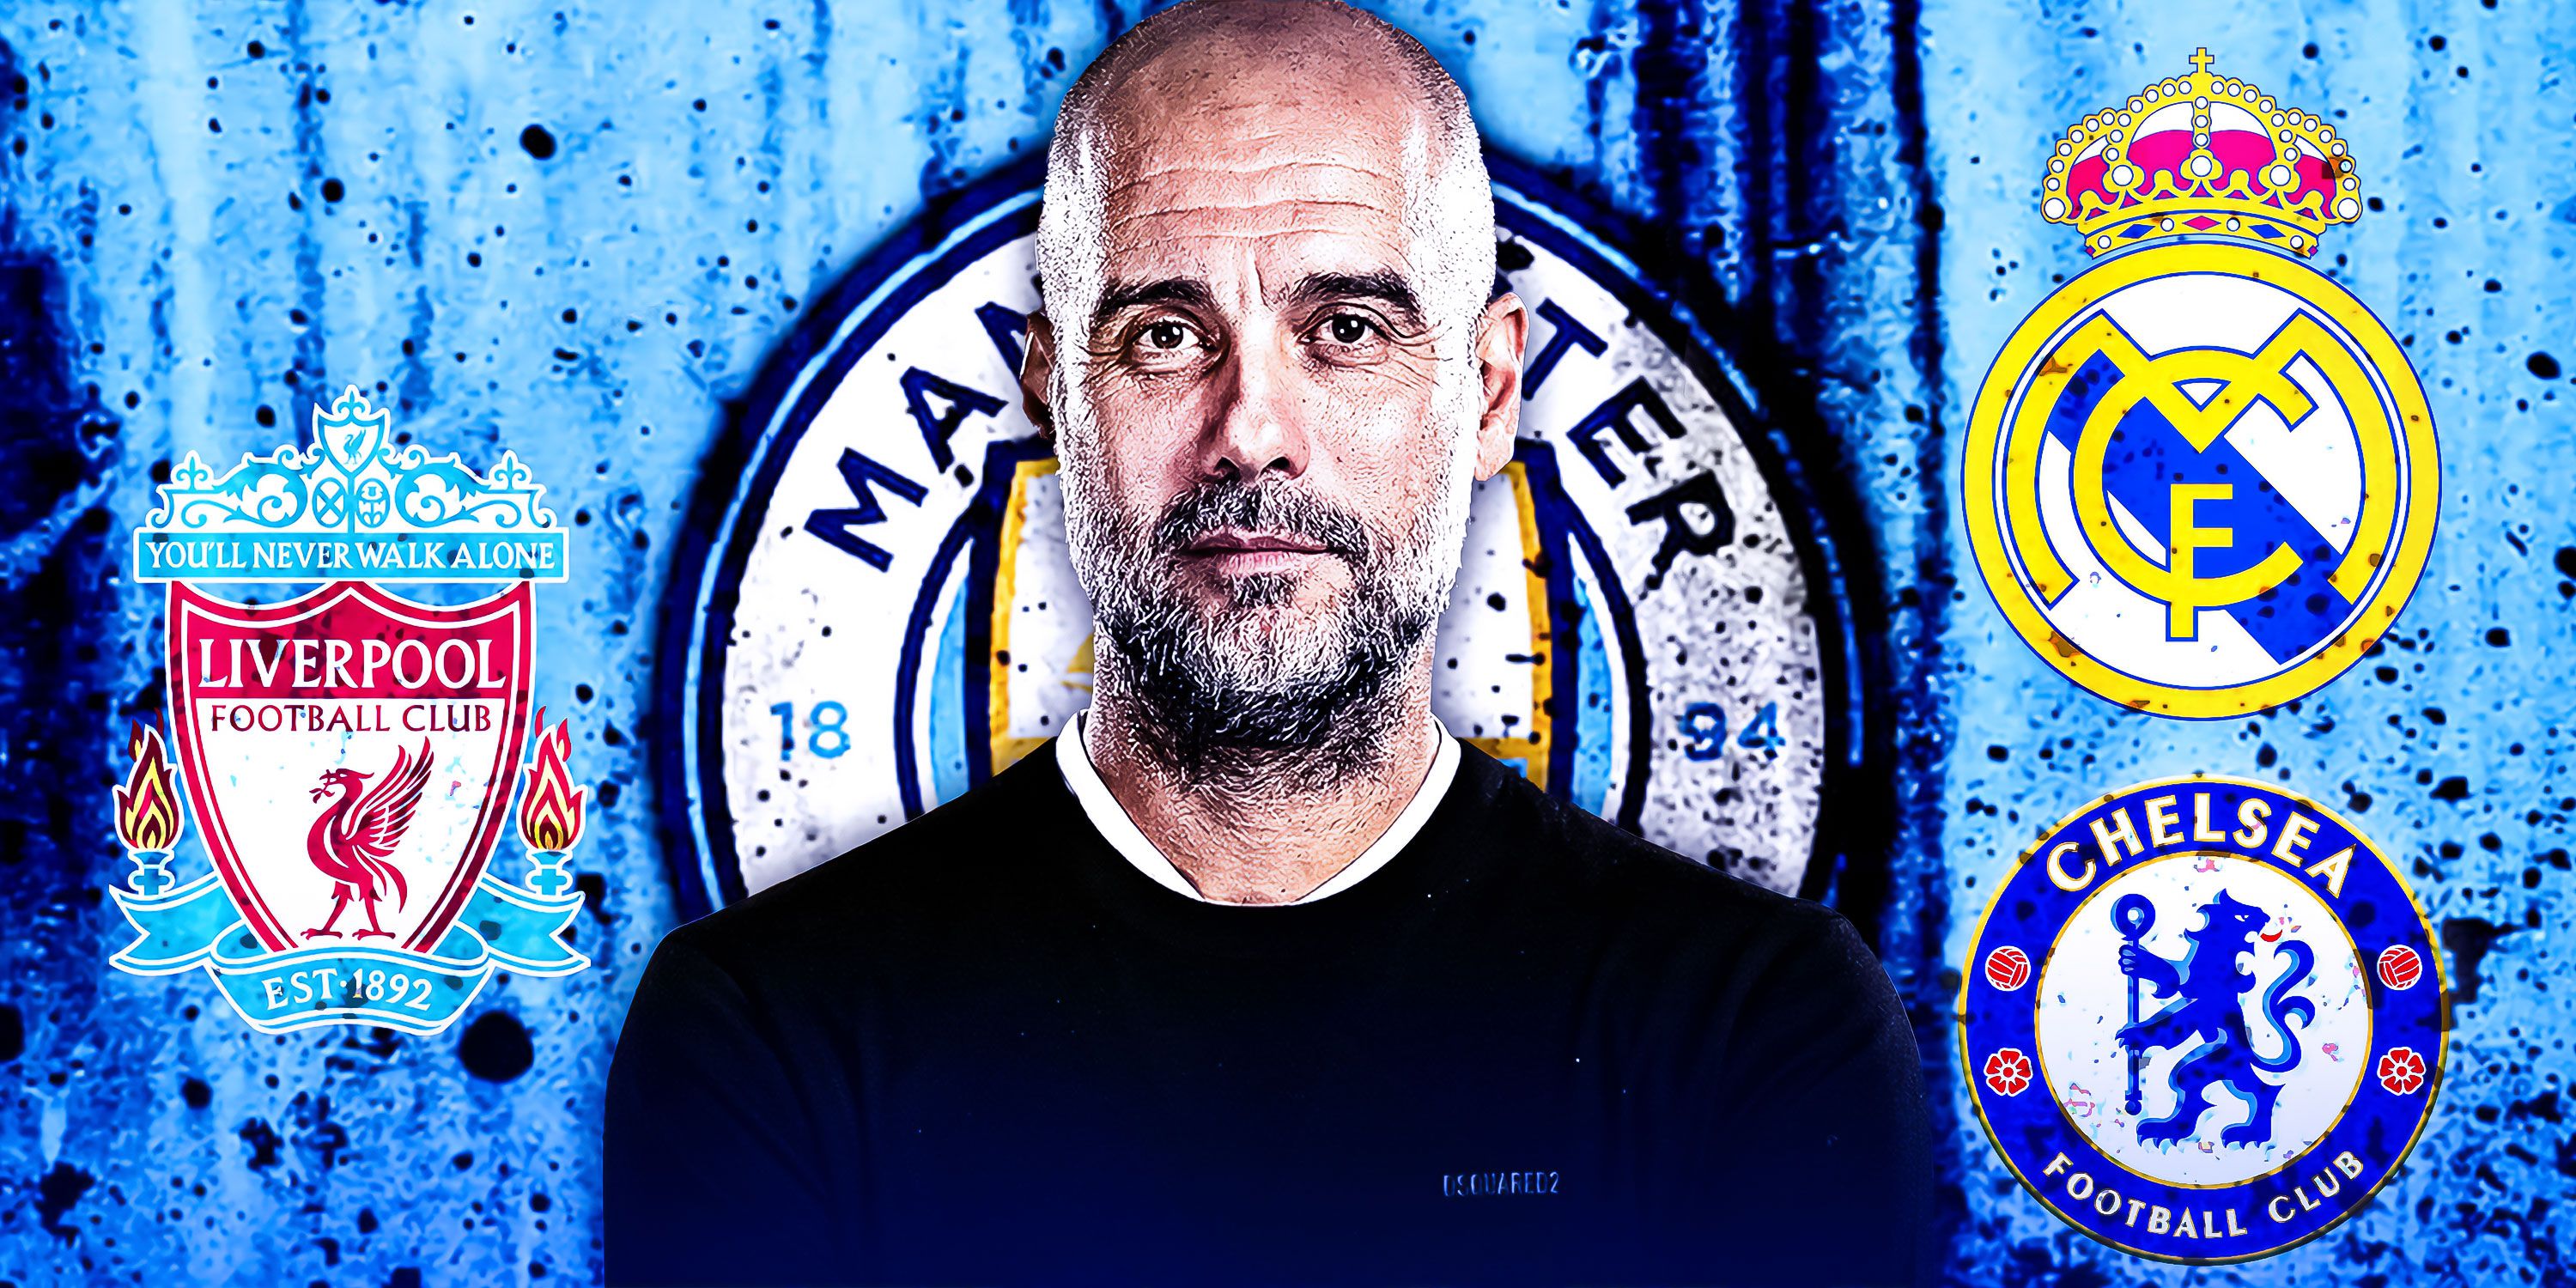 Custom image of Manchester City manager Pep Guardiola with the badges for Liverpool, Chelsea and Real Madrid also visible